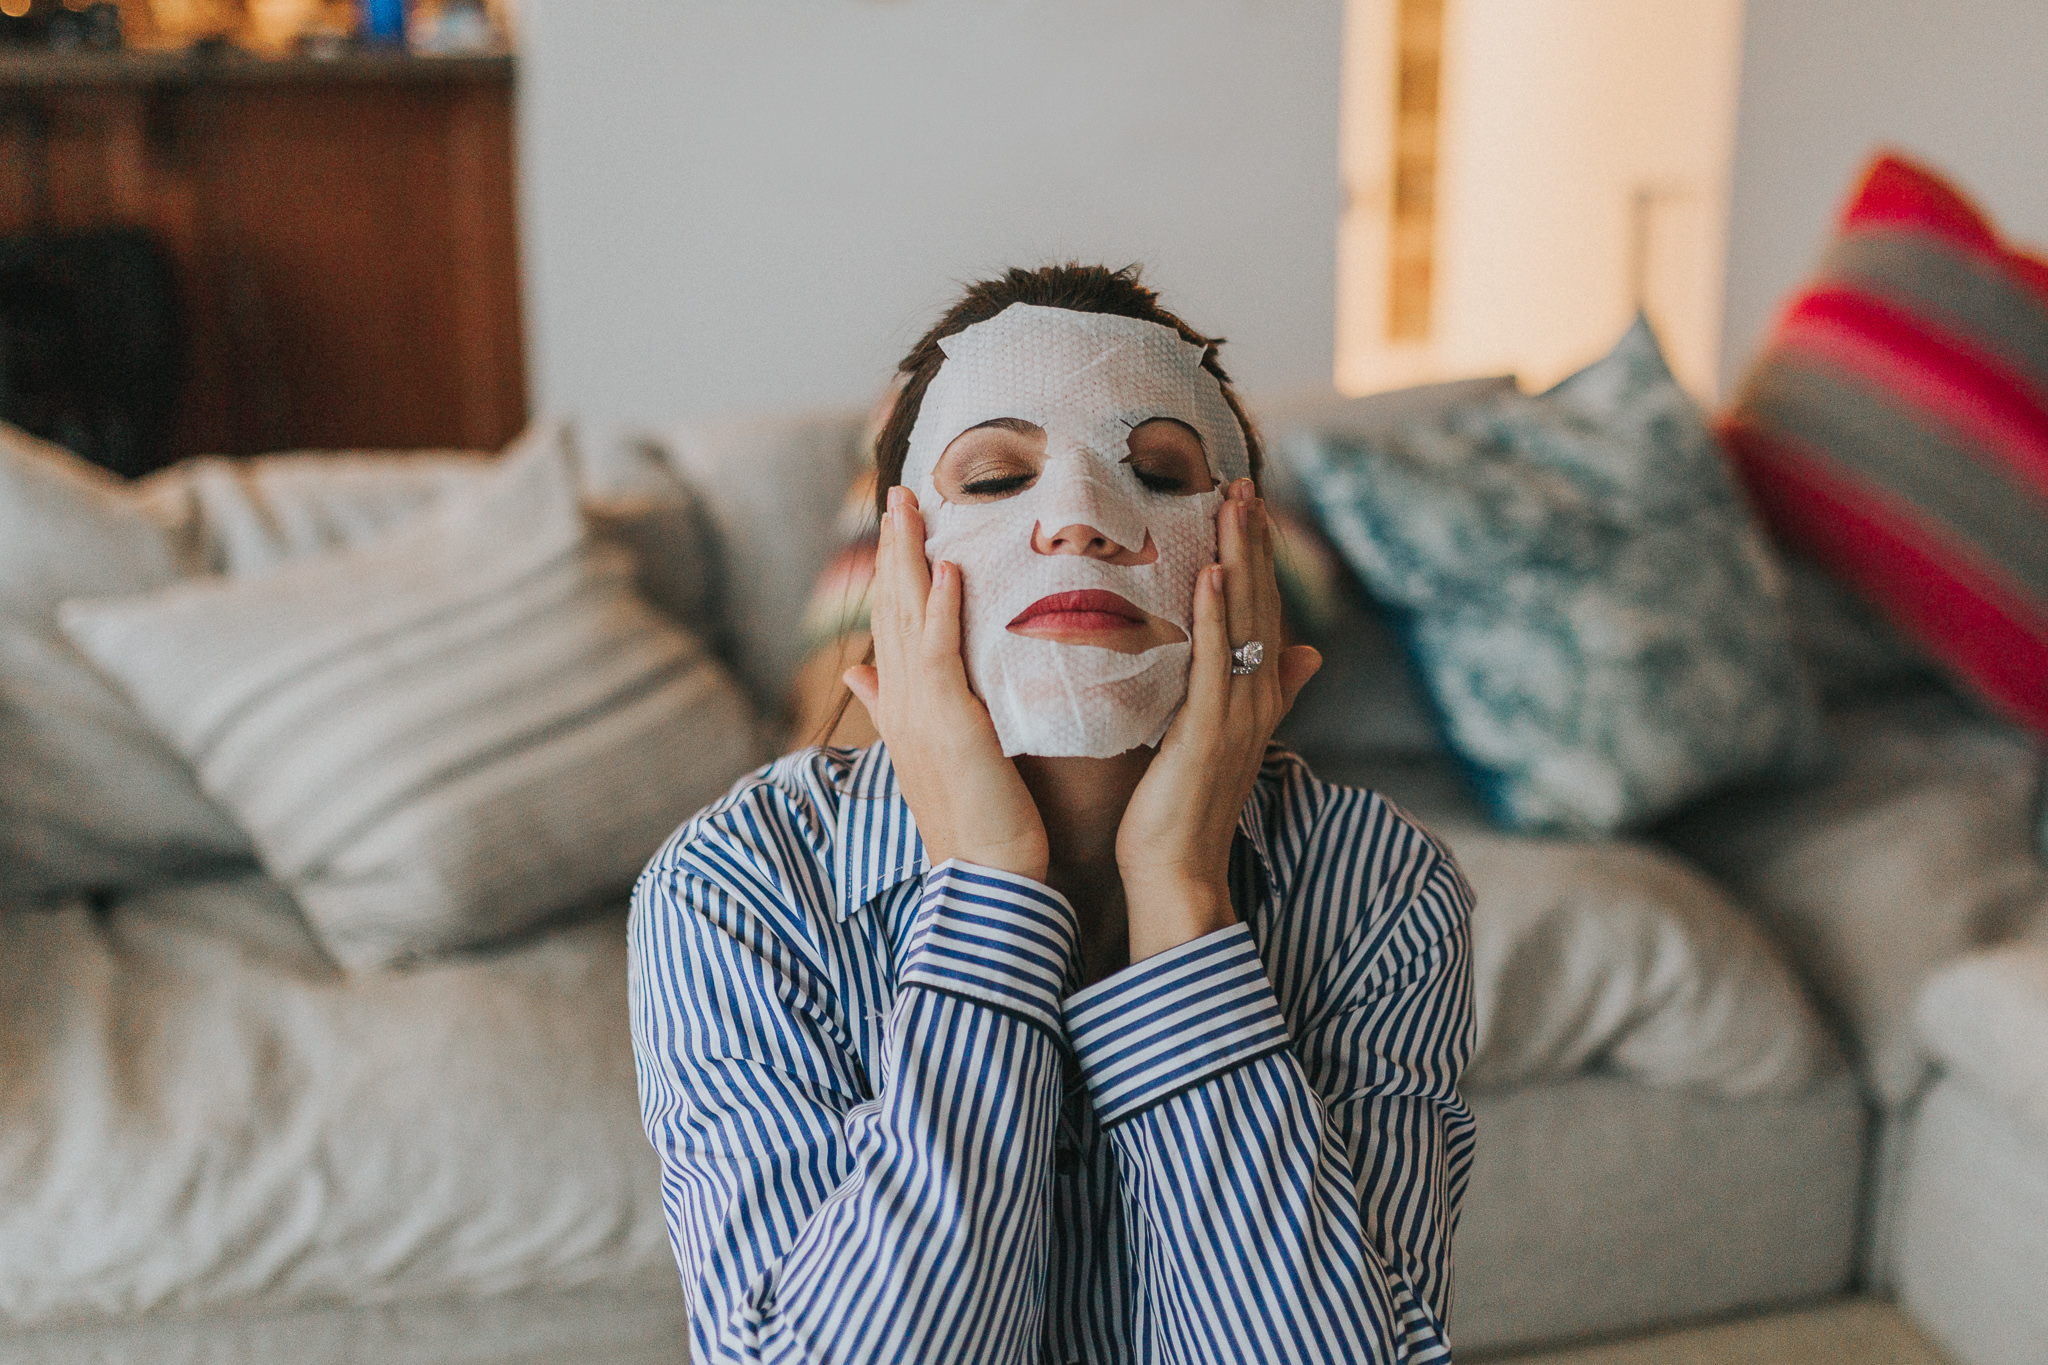 Easy Sheet Masks for Mama “Me Time” - now & gen